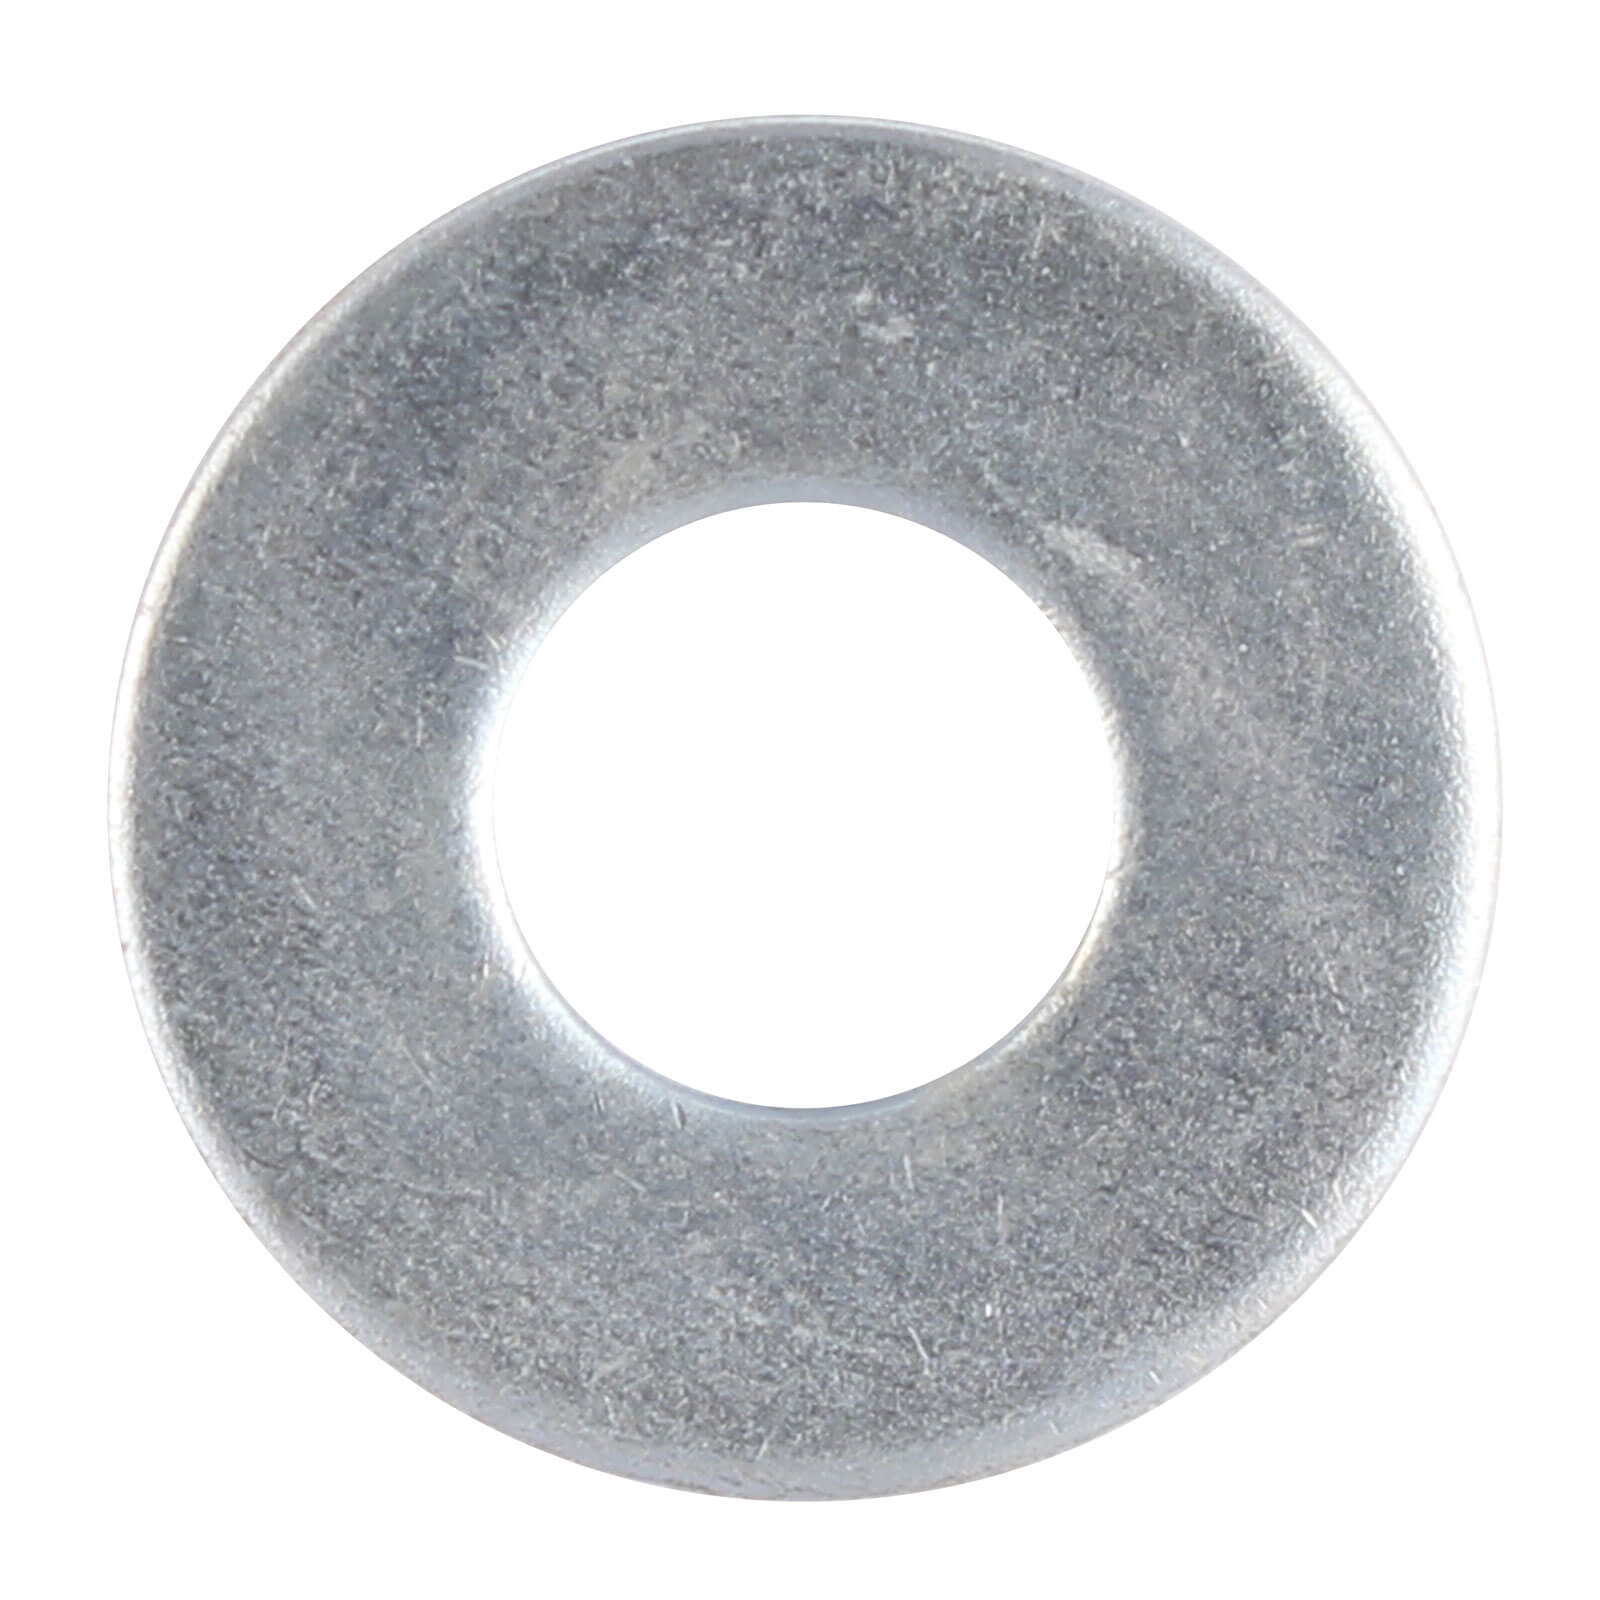 Image of Steel Washers Zinc Plated 16mm 30mm Pack of 8